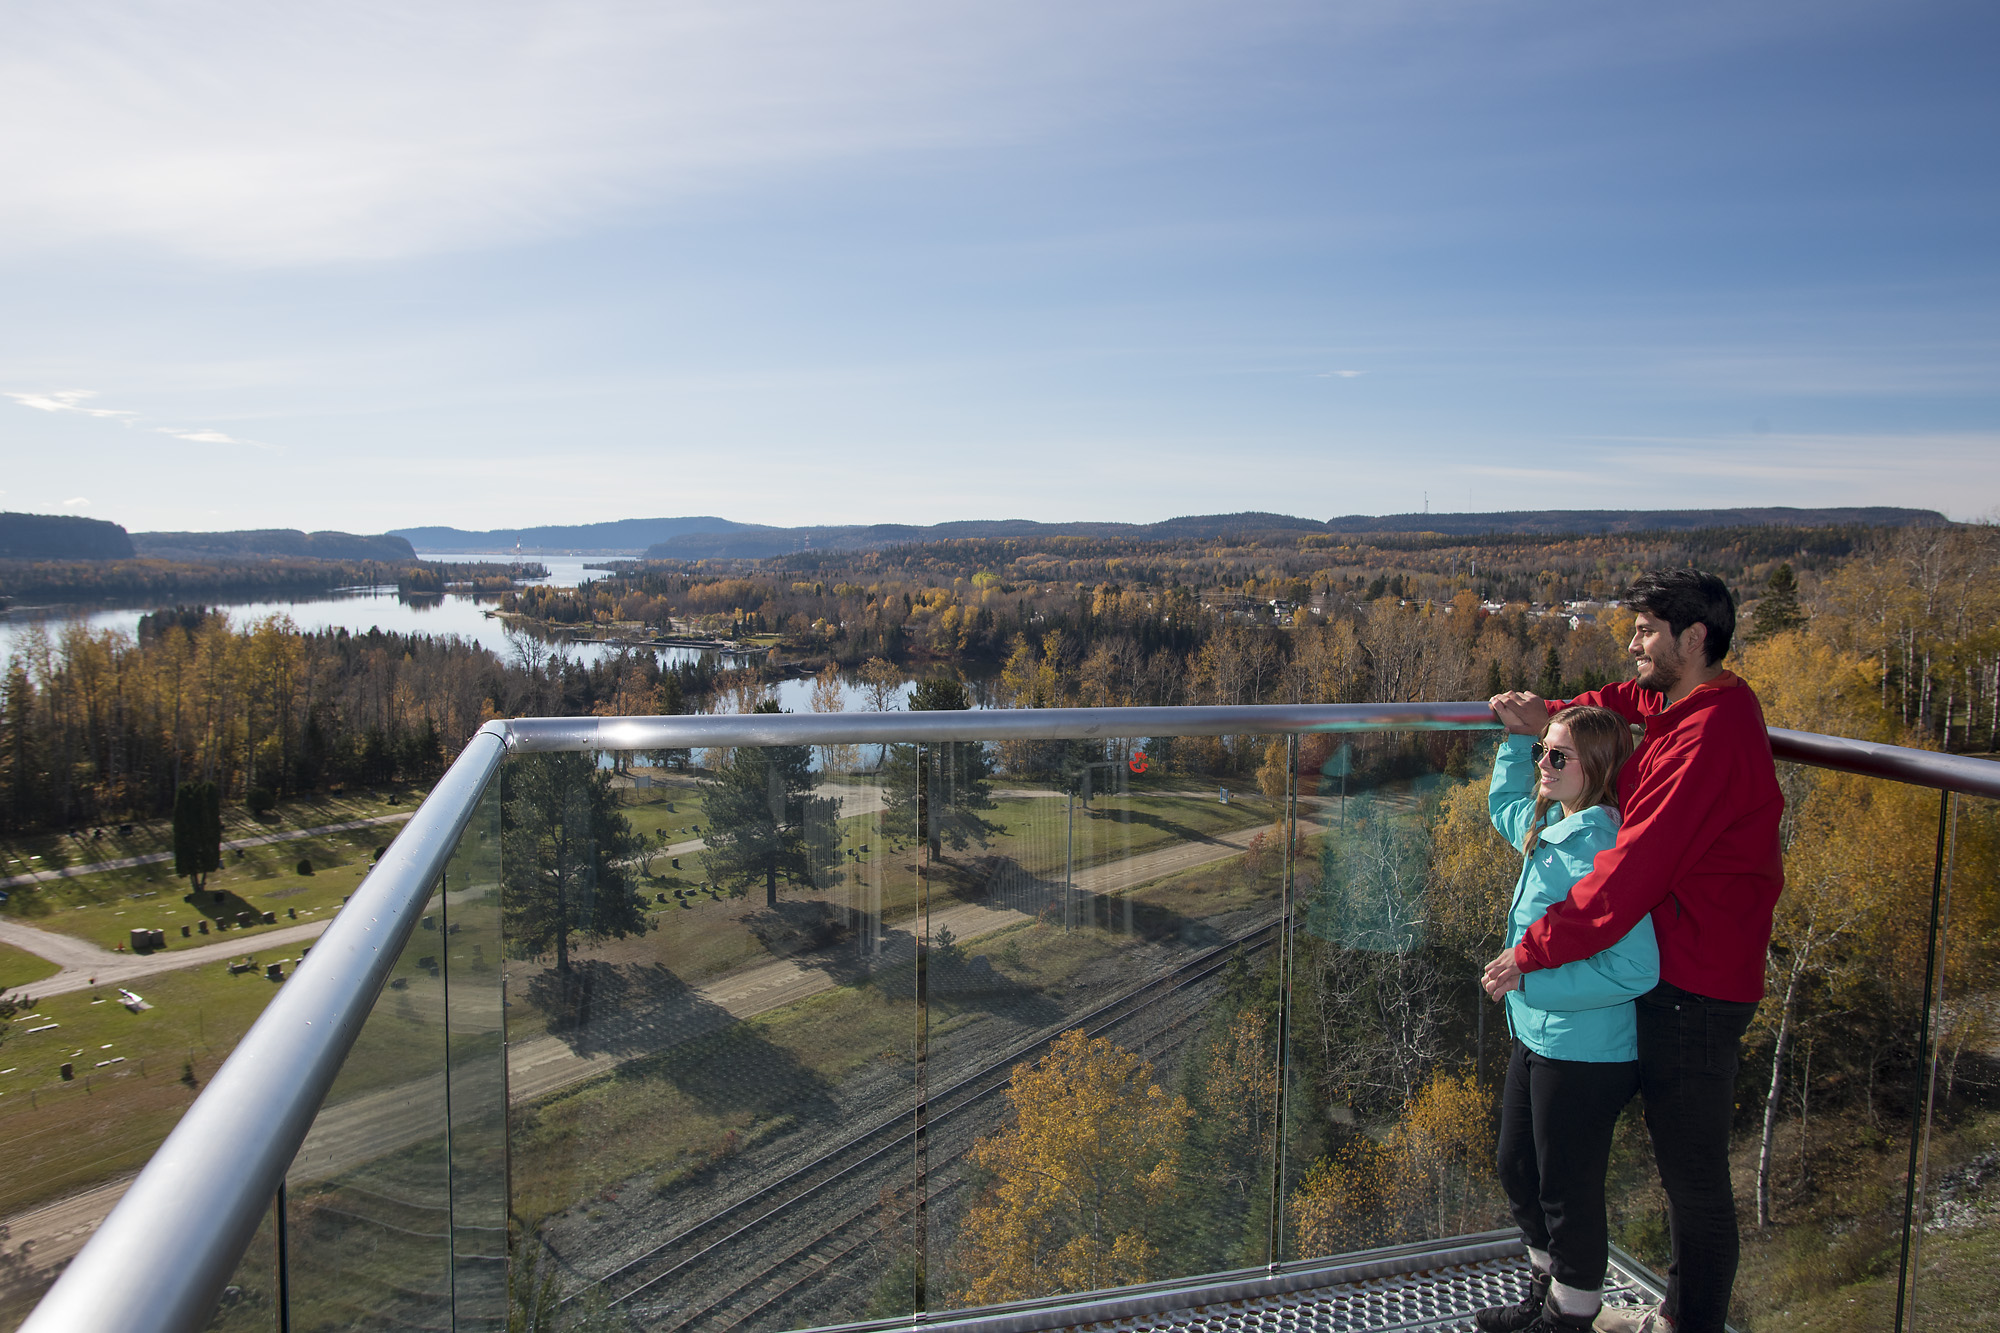 Islay and Andres enjoy an incredible view of the town of Nipigon and surrounding area from the Bridgeview Lookout Tower